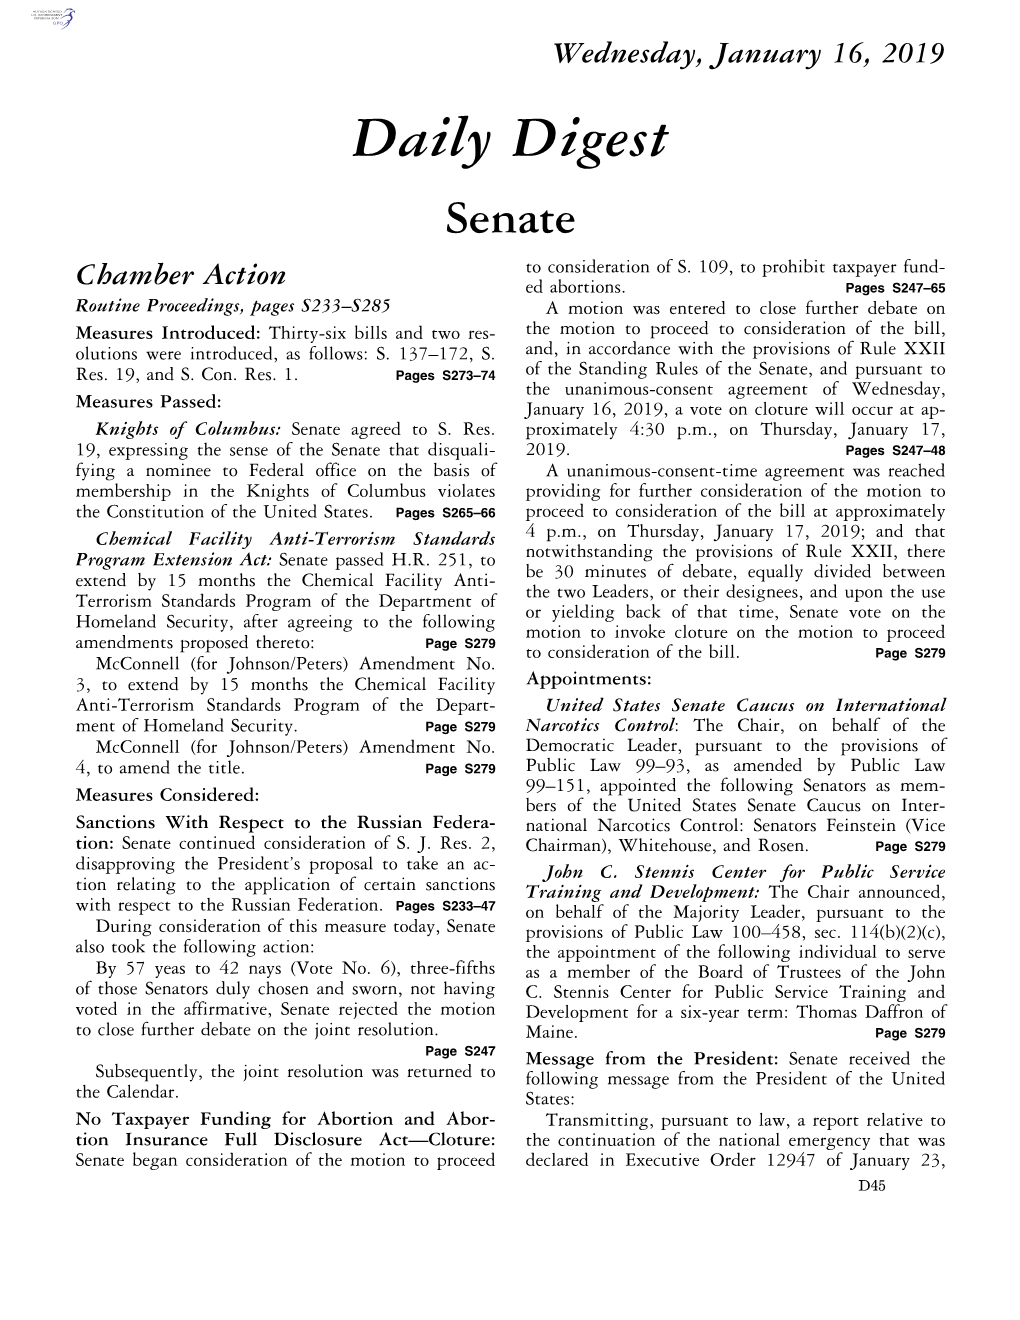 Daily Digest Senate to Consideration of S